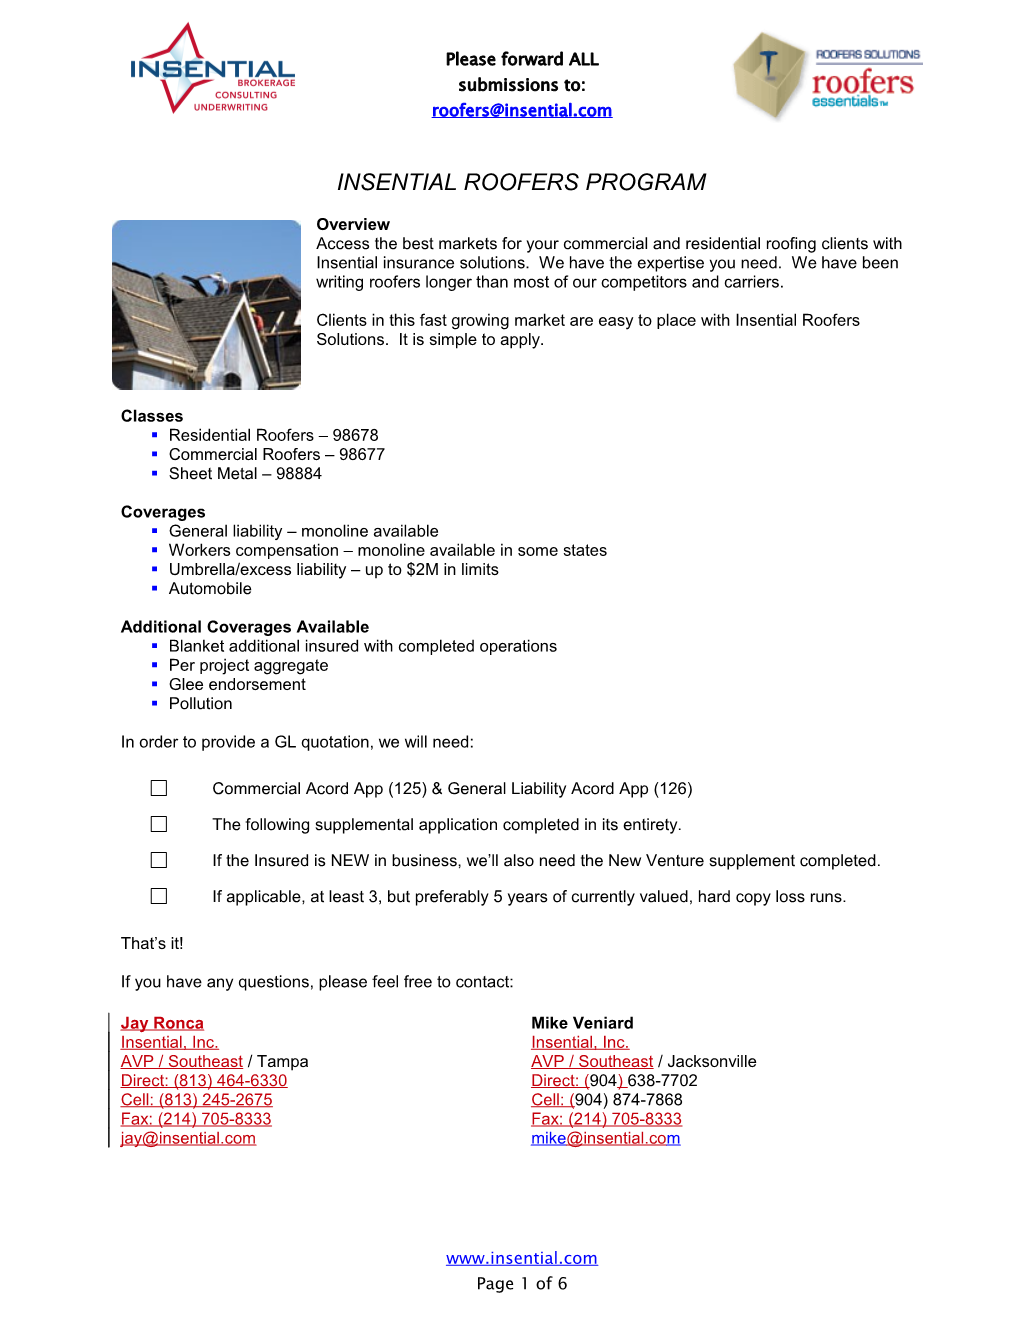 Insential Roofers Program